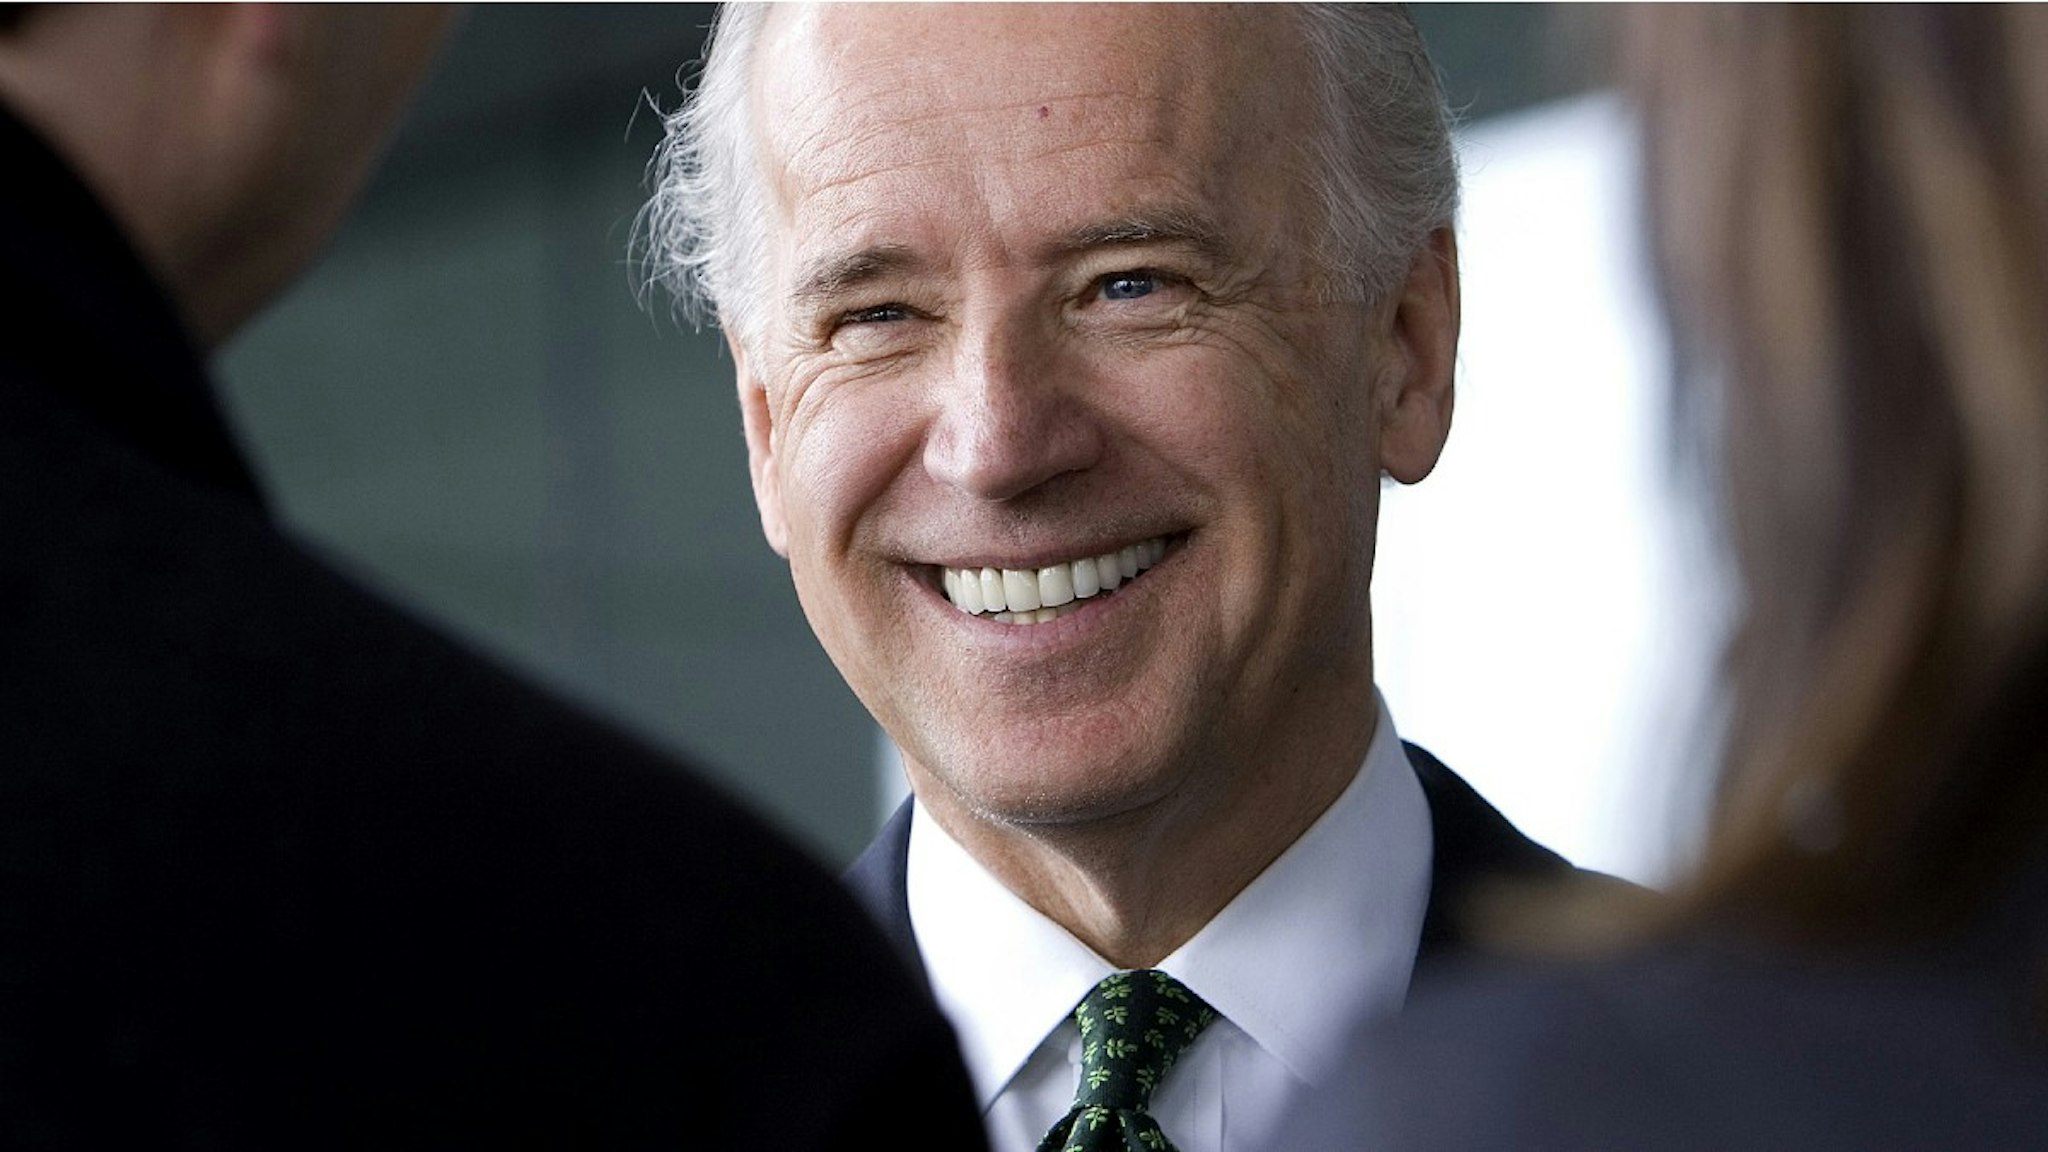 Democratic United States Senator Joe Biden appears at the St. Patrick's Day Breakfast at the Boston Convention and Exhibition Center in Boston, Massachusetts, Sunday, March 18, 2007.